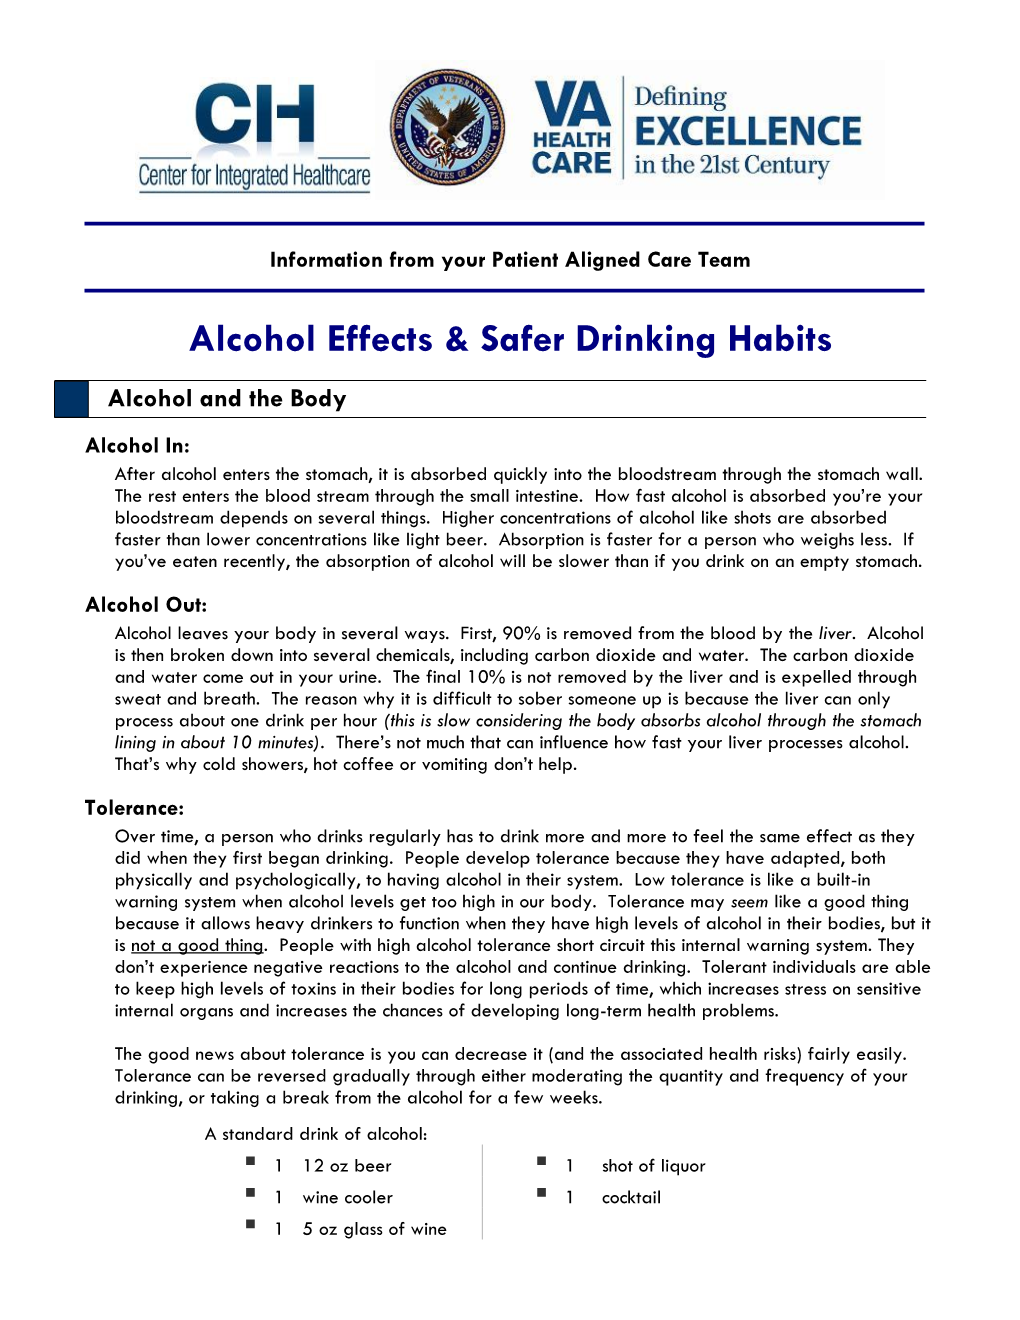 Alcohol Effects & Safer Drinking Habits